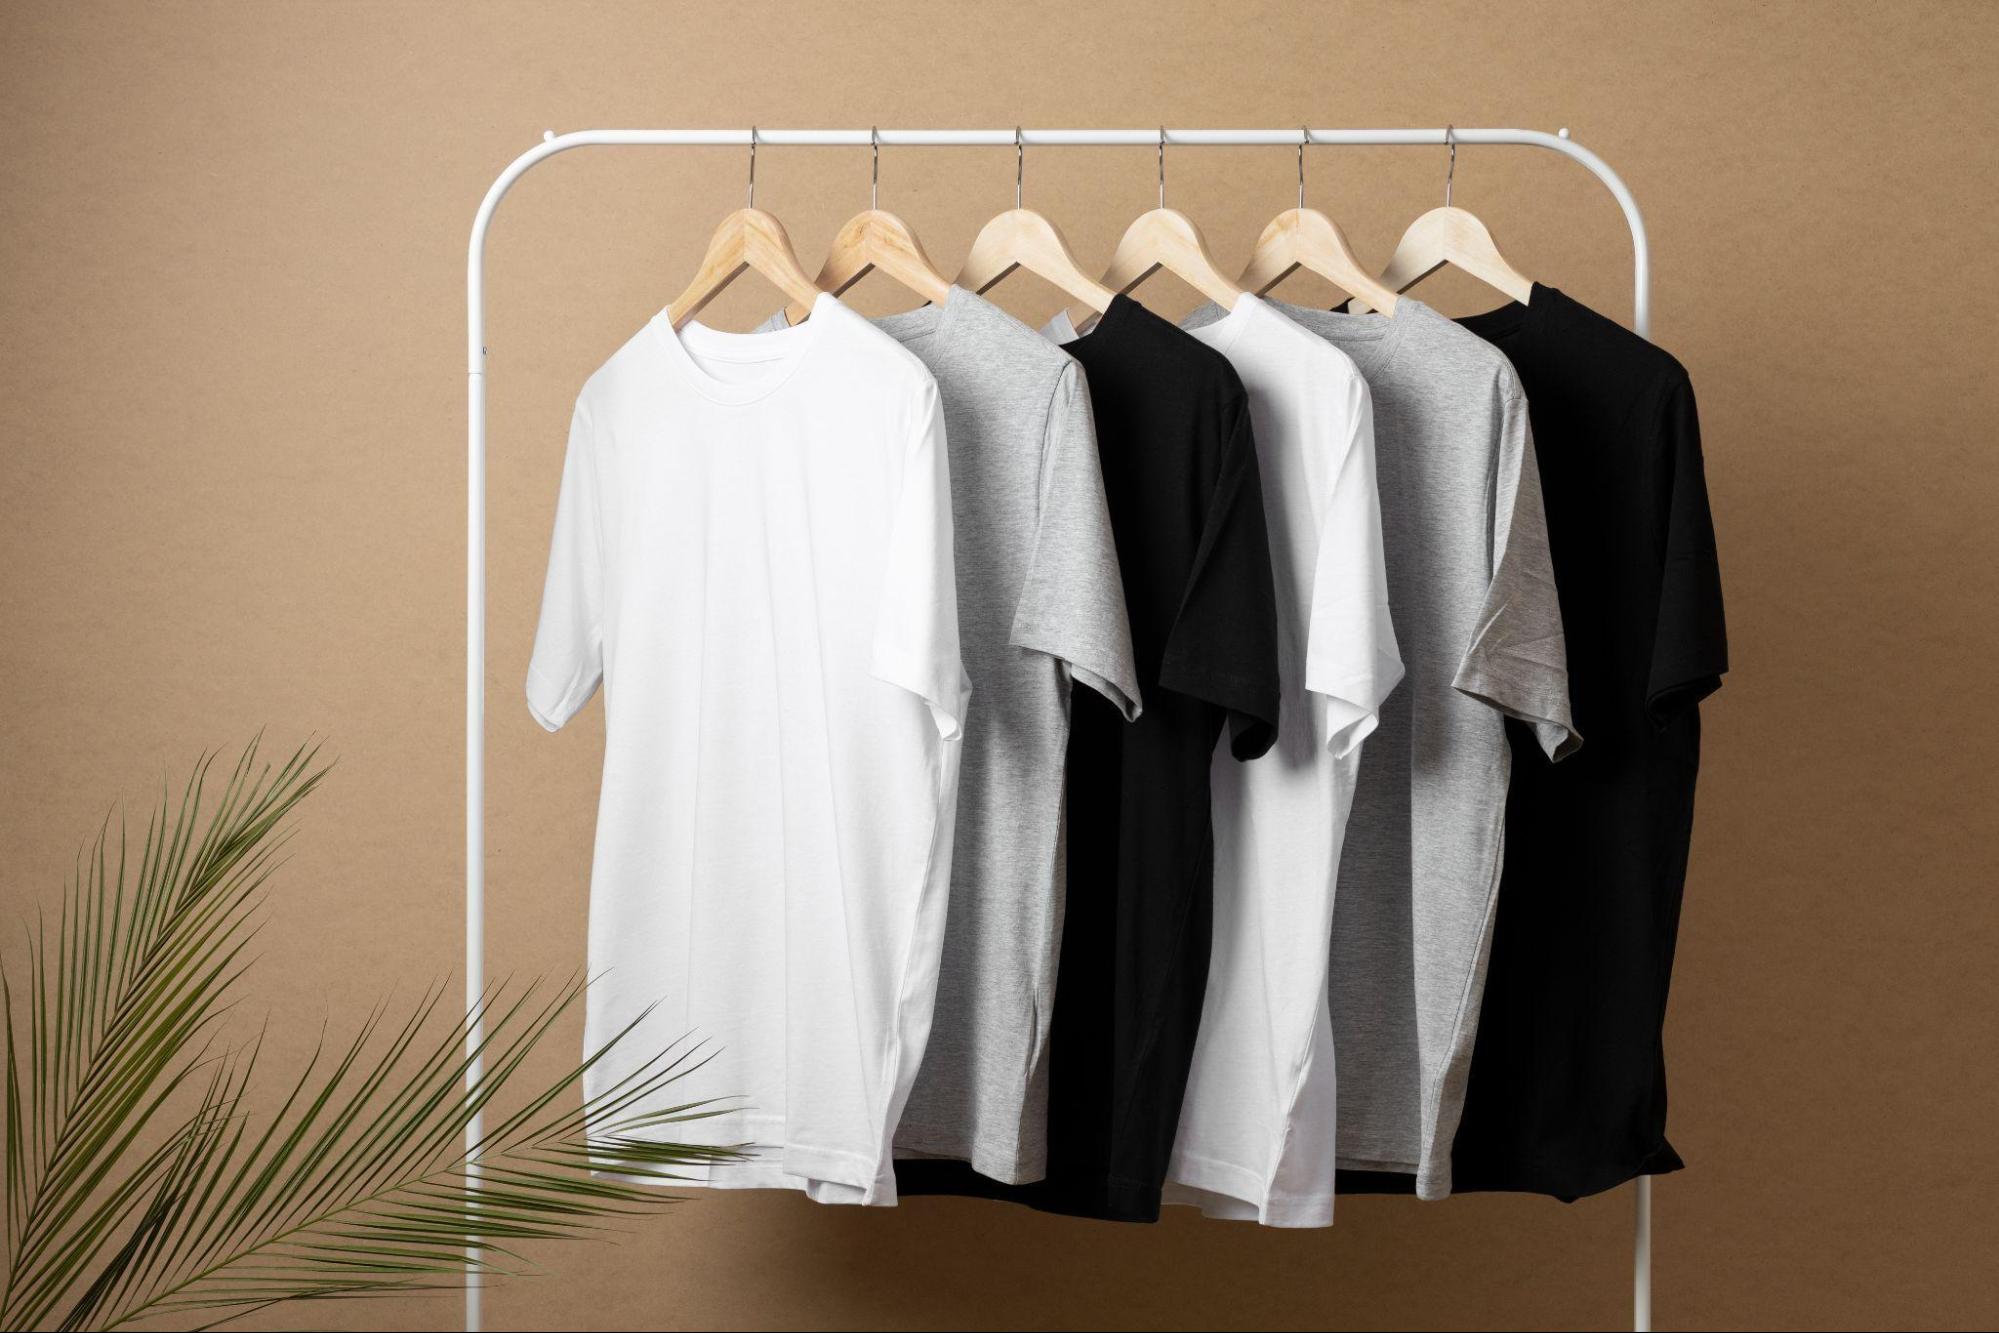 Thinking of Starting a Clothing Line? Check Out These Tips: Opportunities, Benefits, and How to Create New Trends